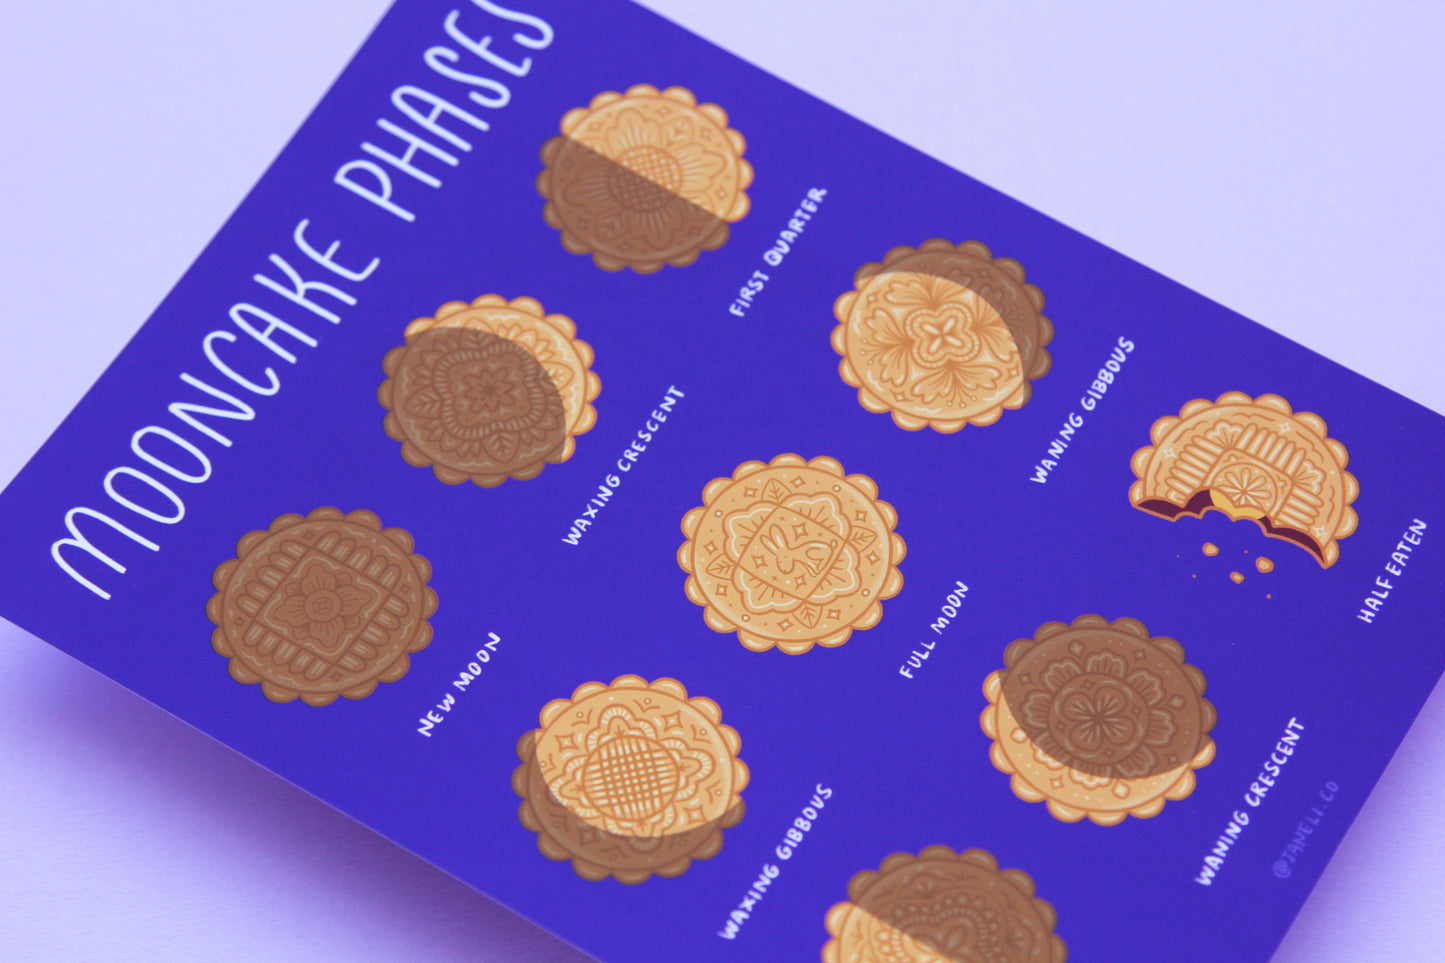 A close up of a JaneLi.Co print that says "Mooncake Phases" with 9 different illustrations of mooncakes in the different moon cycle phases over a purple background.